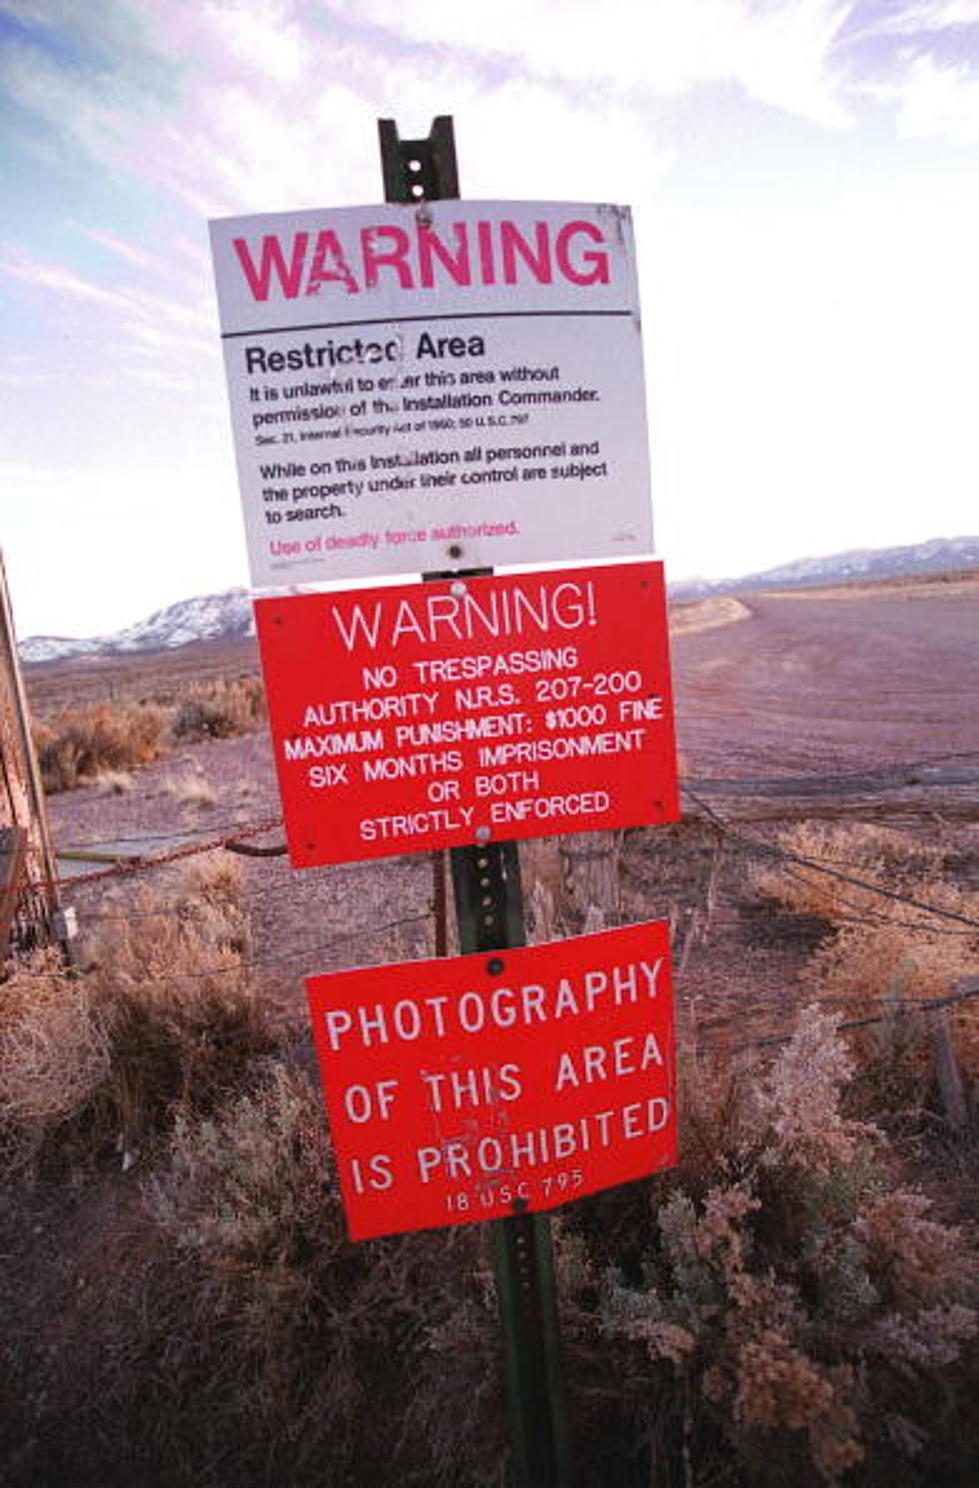 Area 51 Actually Does Exist, Says Government, But Was It Used For Hiding Aliens?